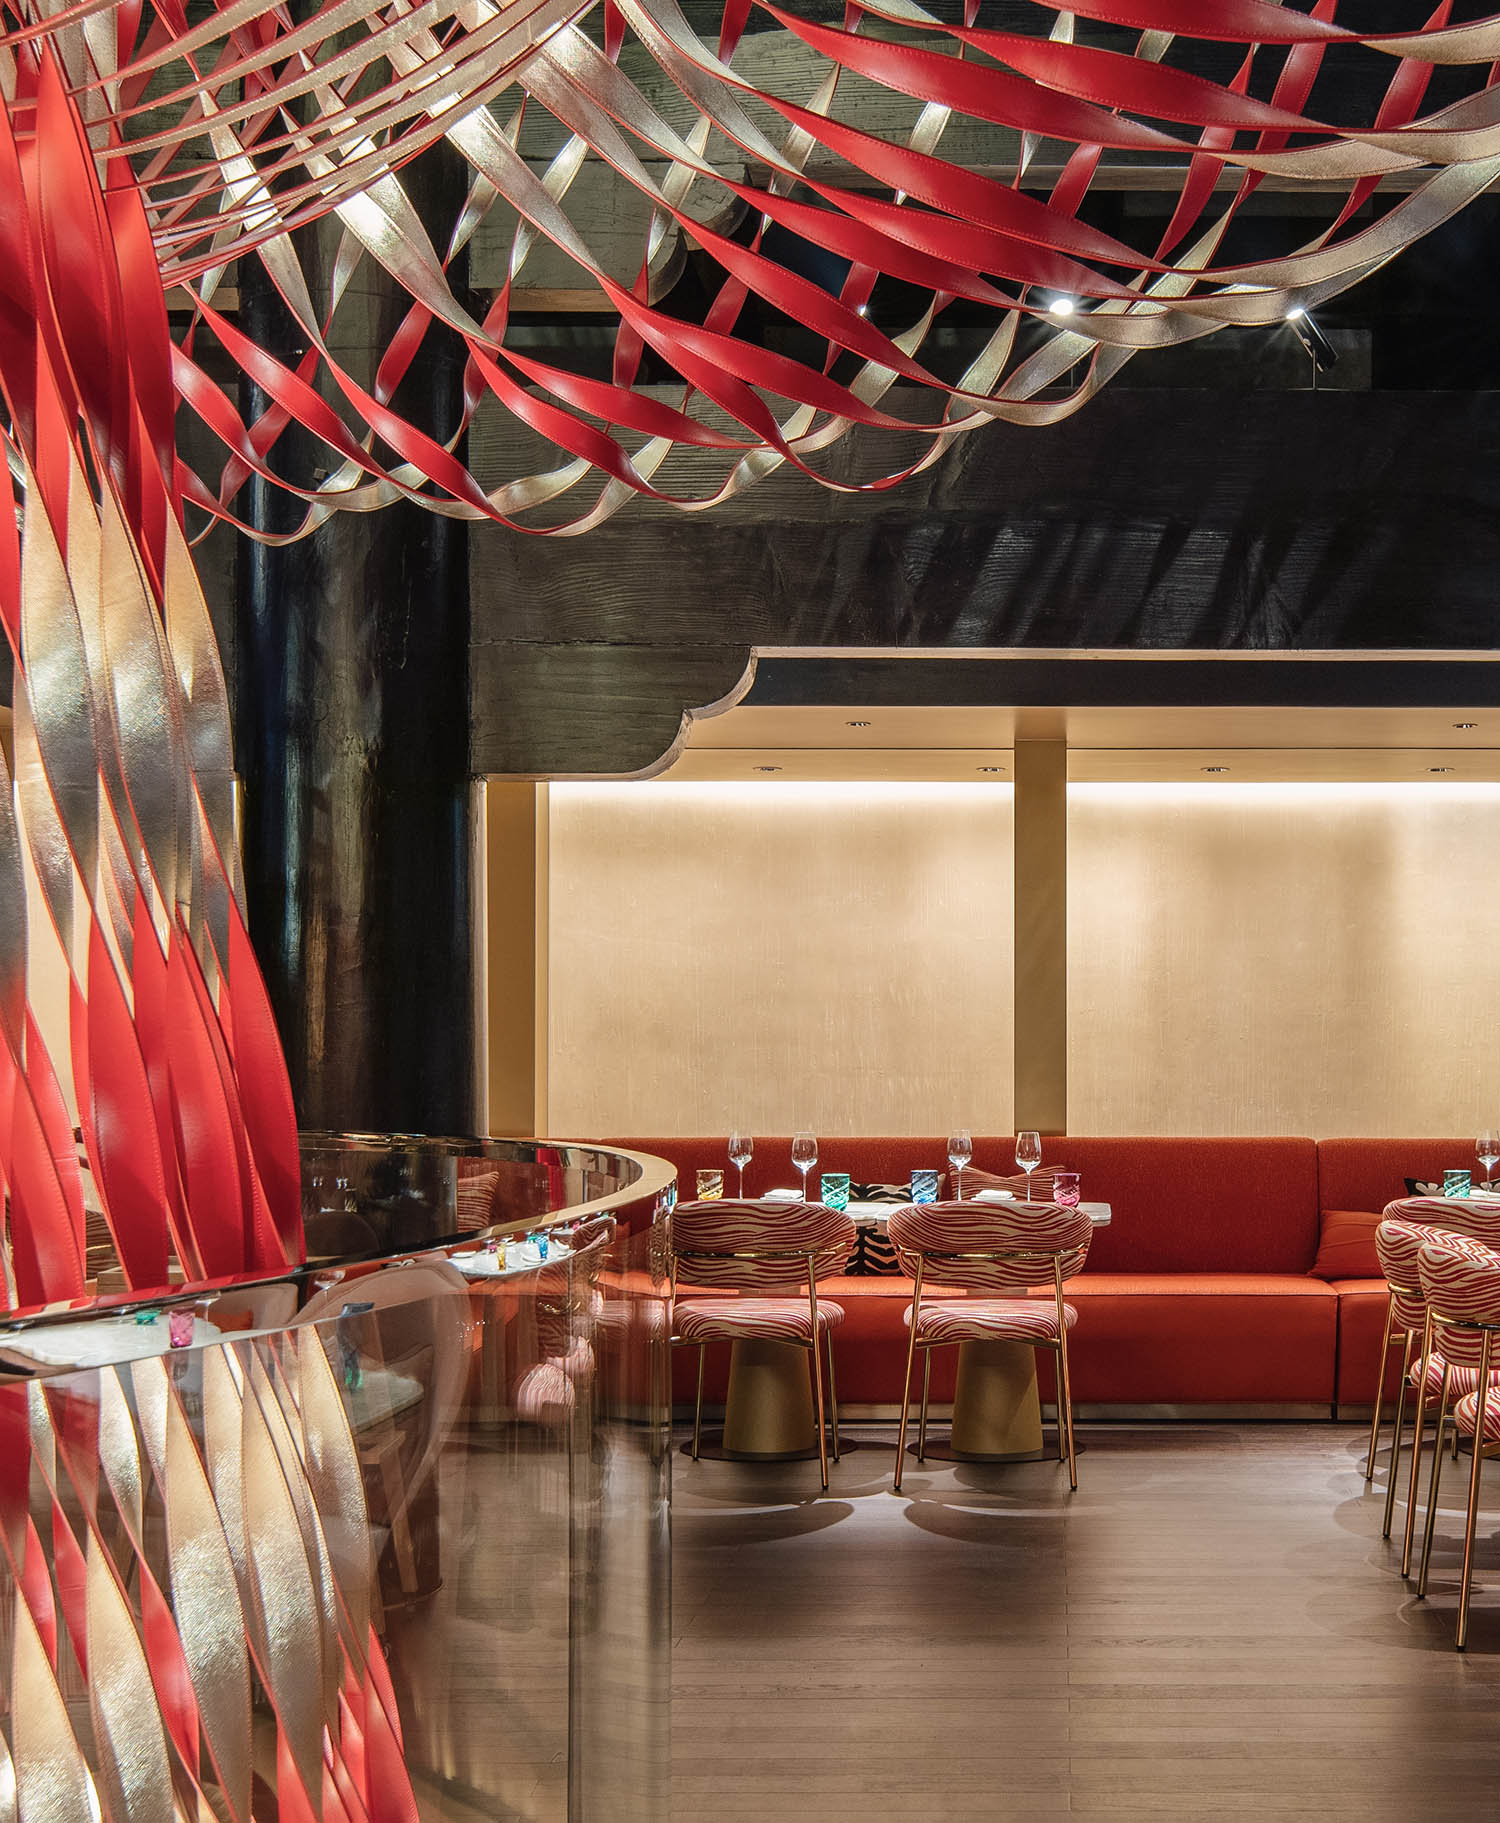 Louis Vuitton Chooses Chengdu For Restaurant Debut In China